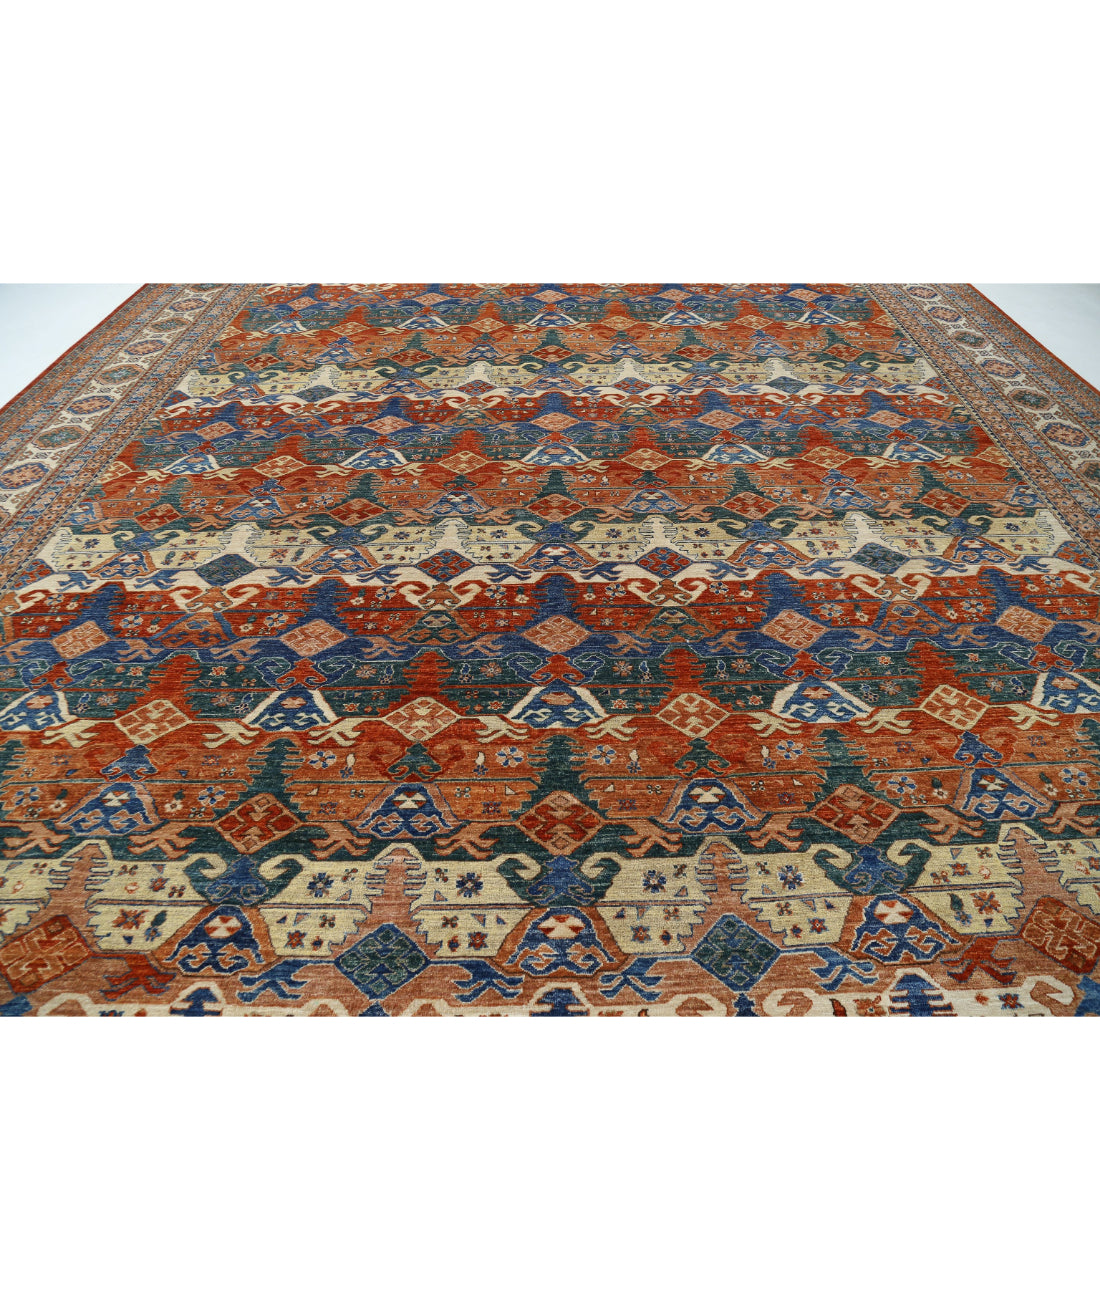 Hand Knotted Nomadic Caucasian Humna Wool Rug - 14'6'' x 19'2'' 14'6'' x 19'2'' (435 X 575) / Multi / Ivory